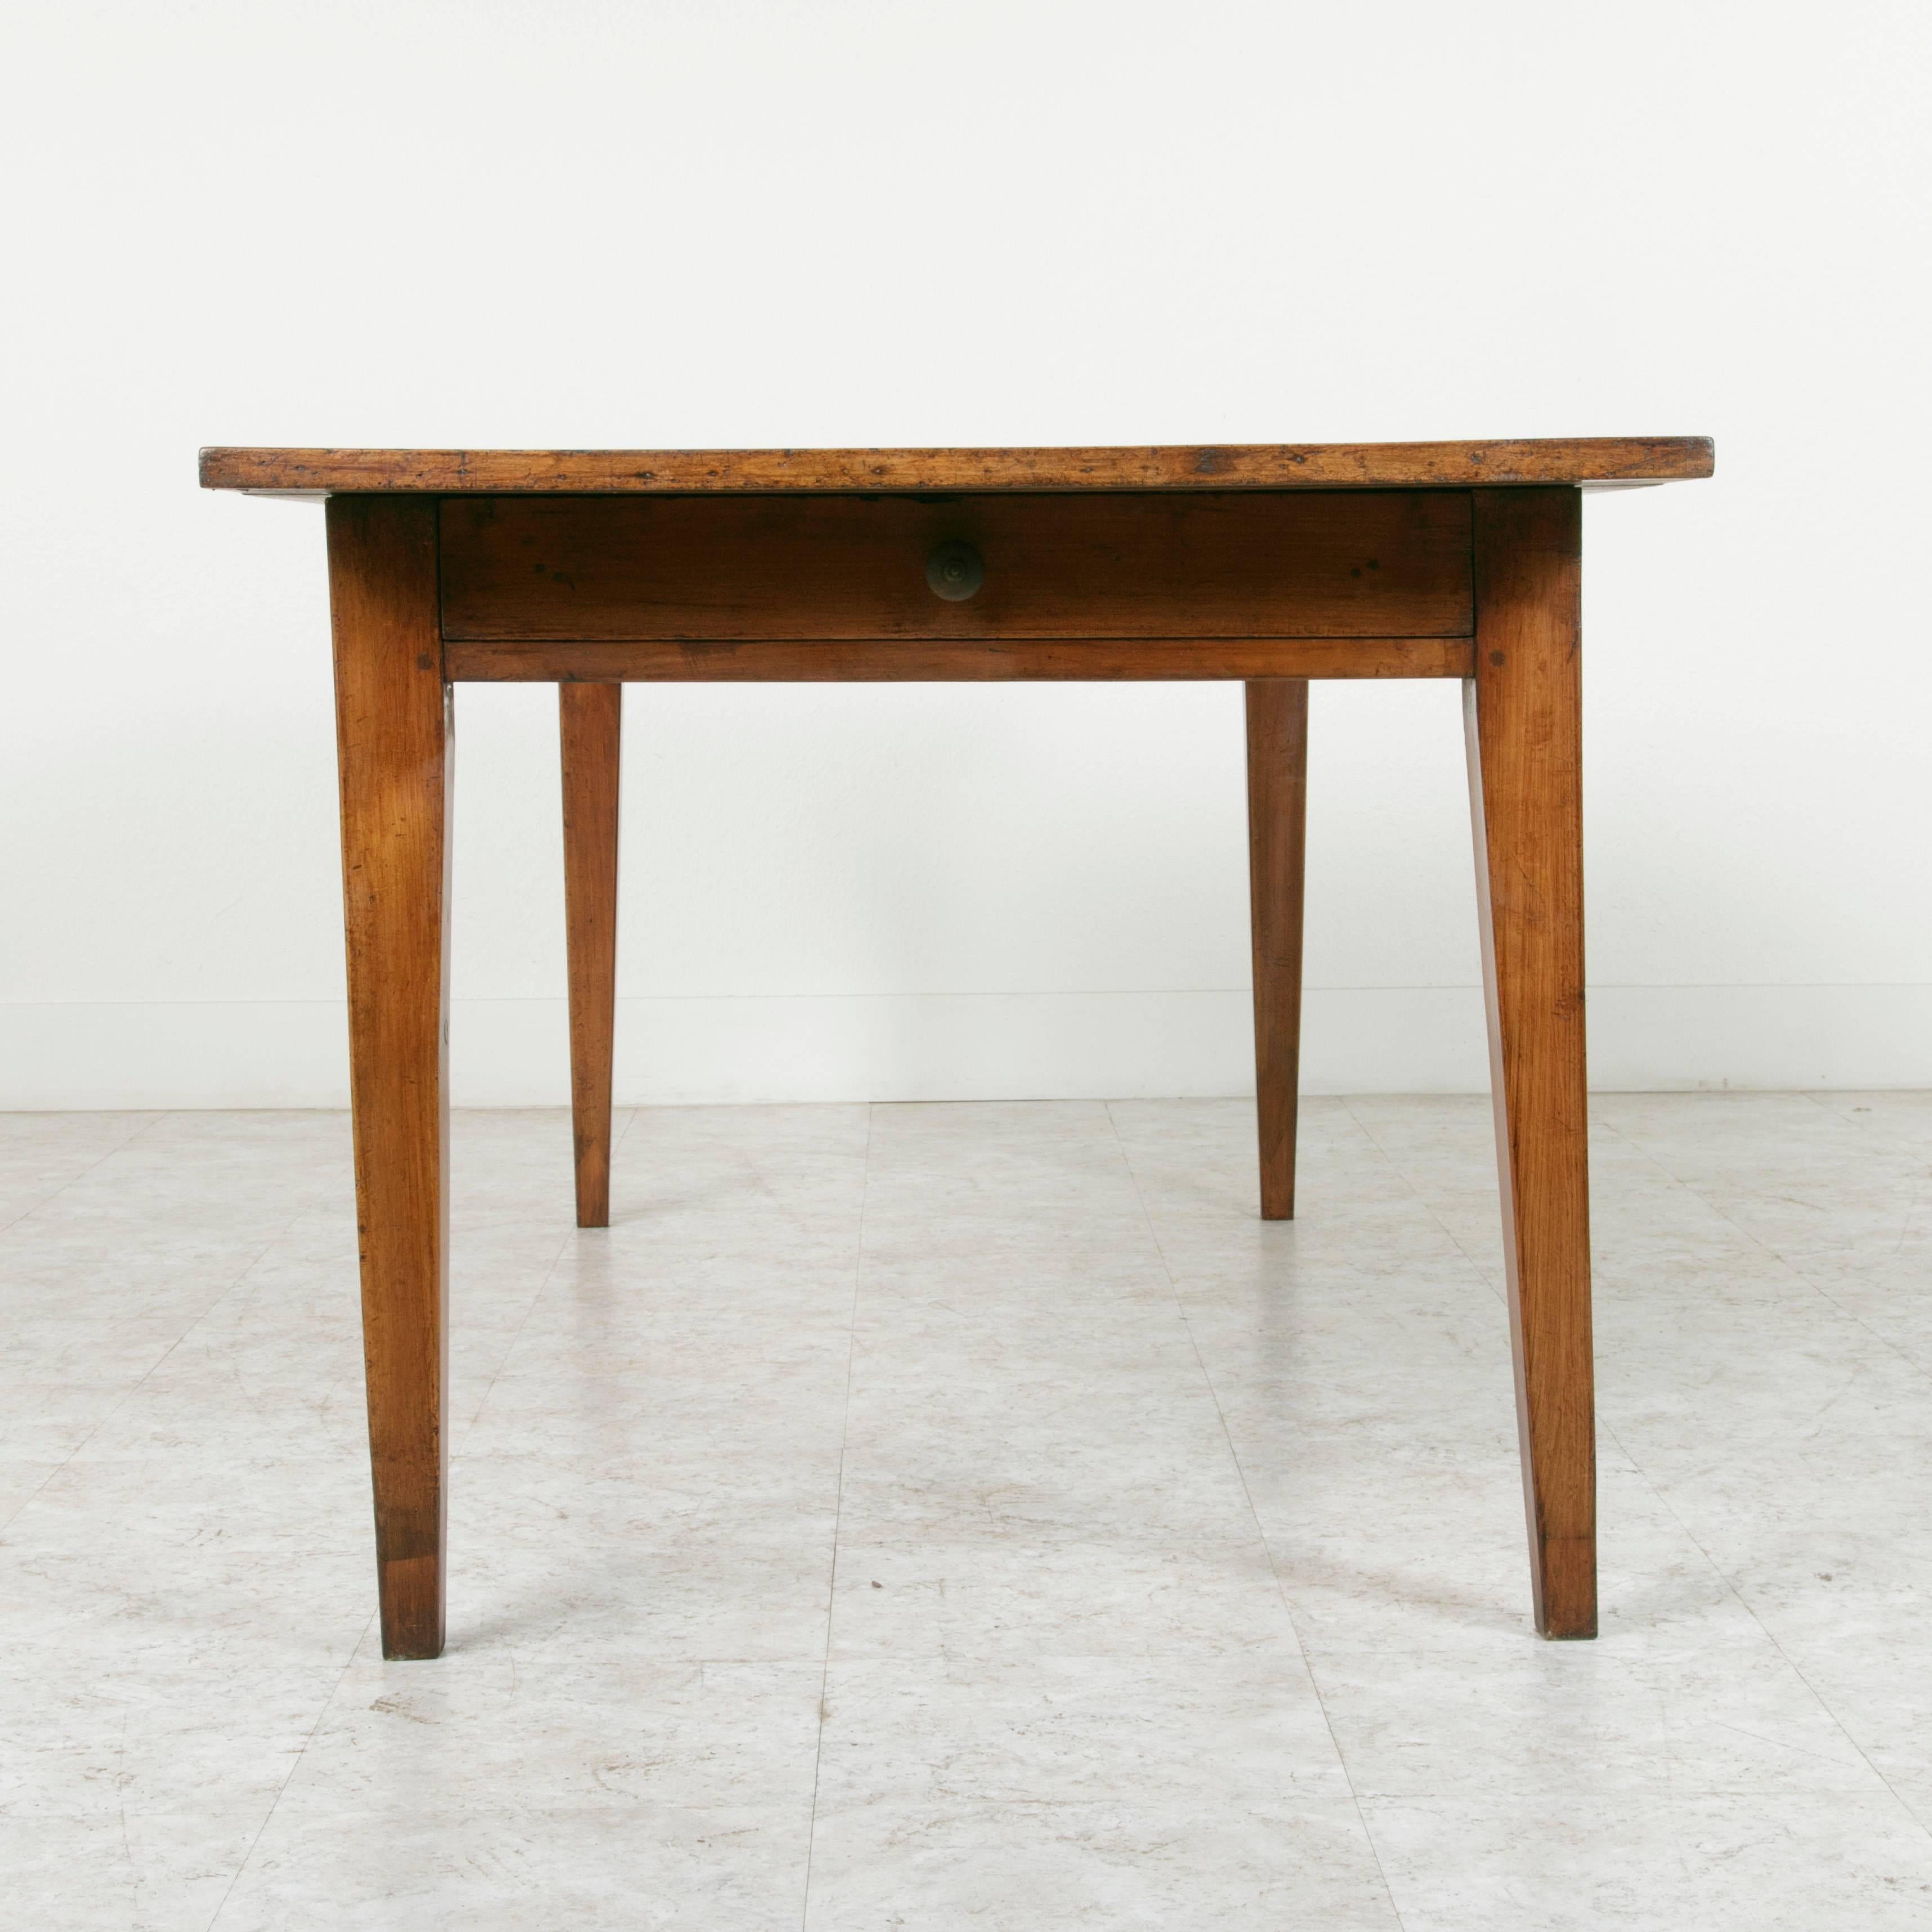 Early 20th Century Antique French Hand Pegged Walnut Farm Table from Le Perche